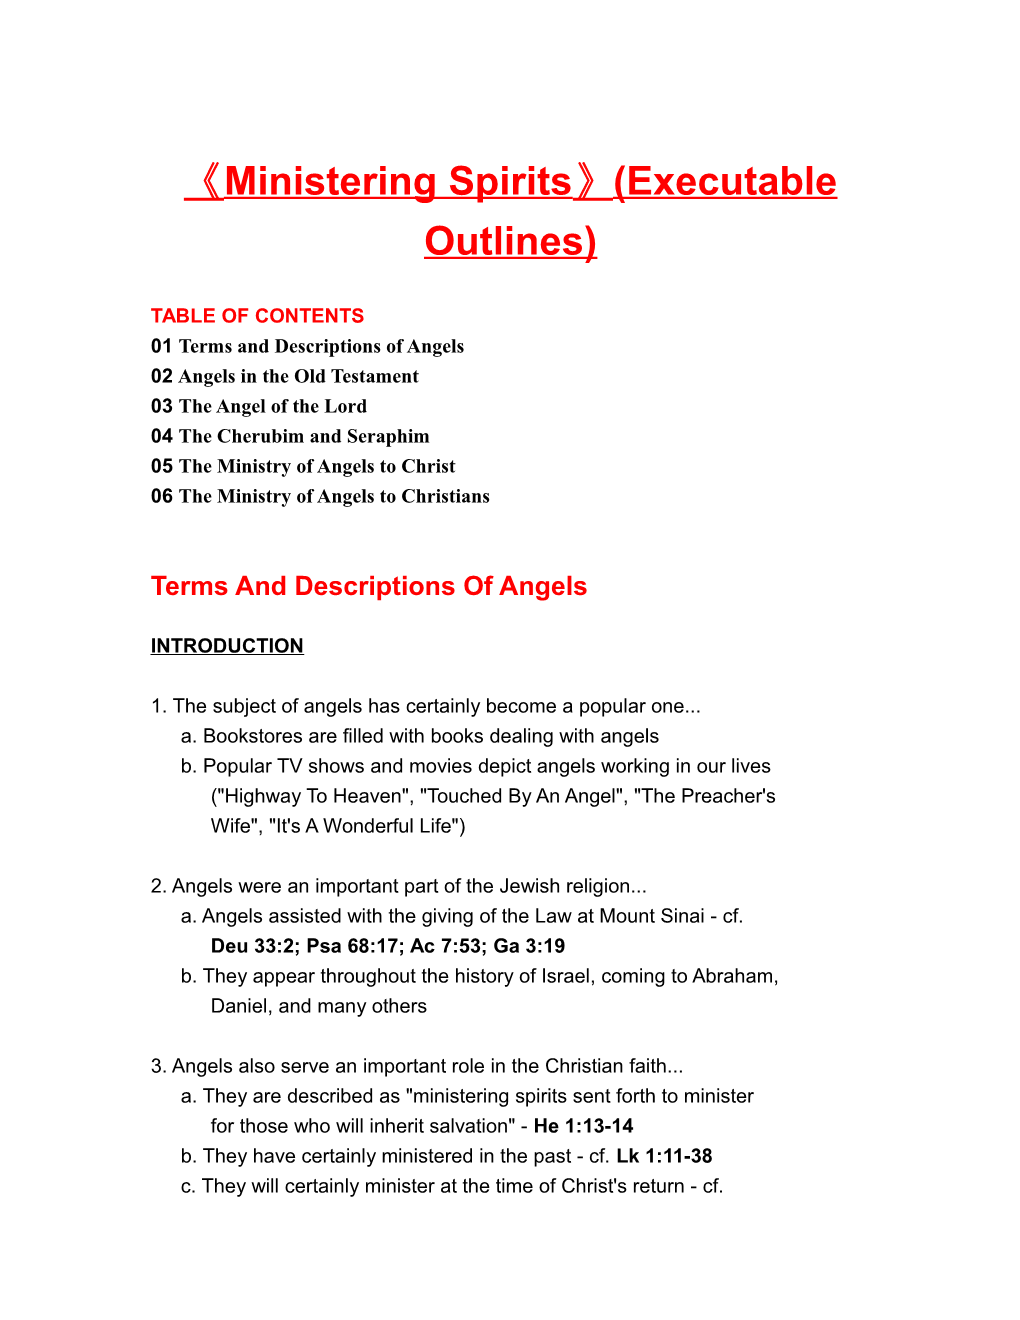 Ministering Spirits (Executable Outlines)